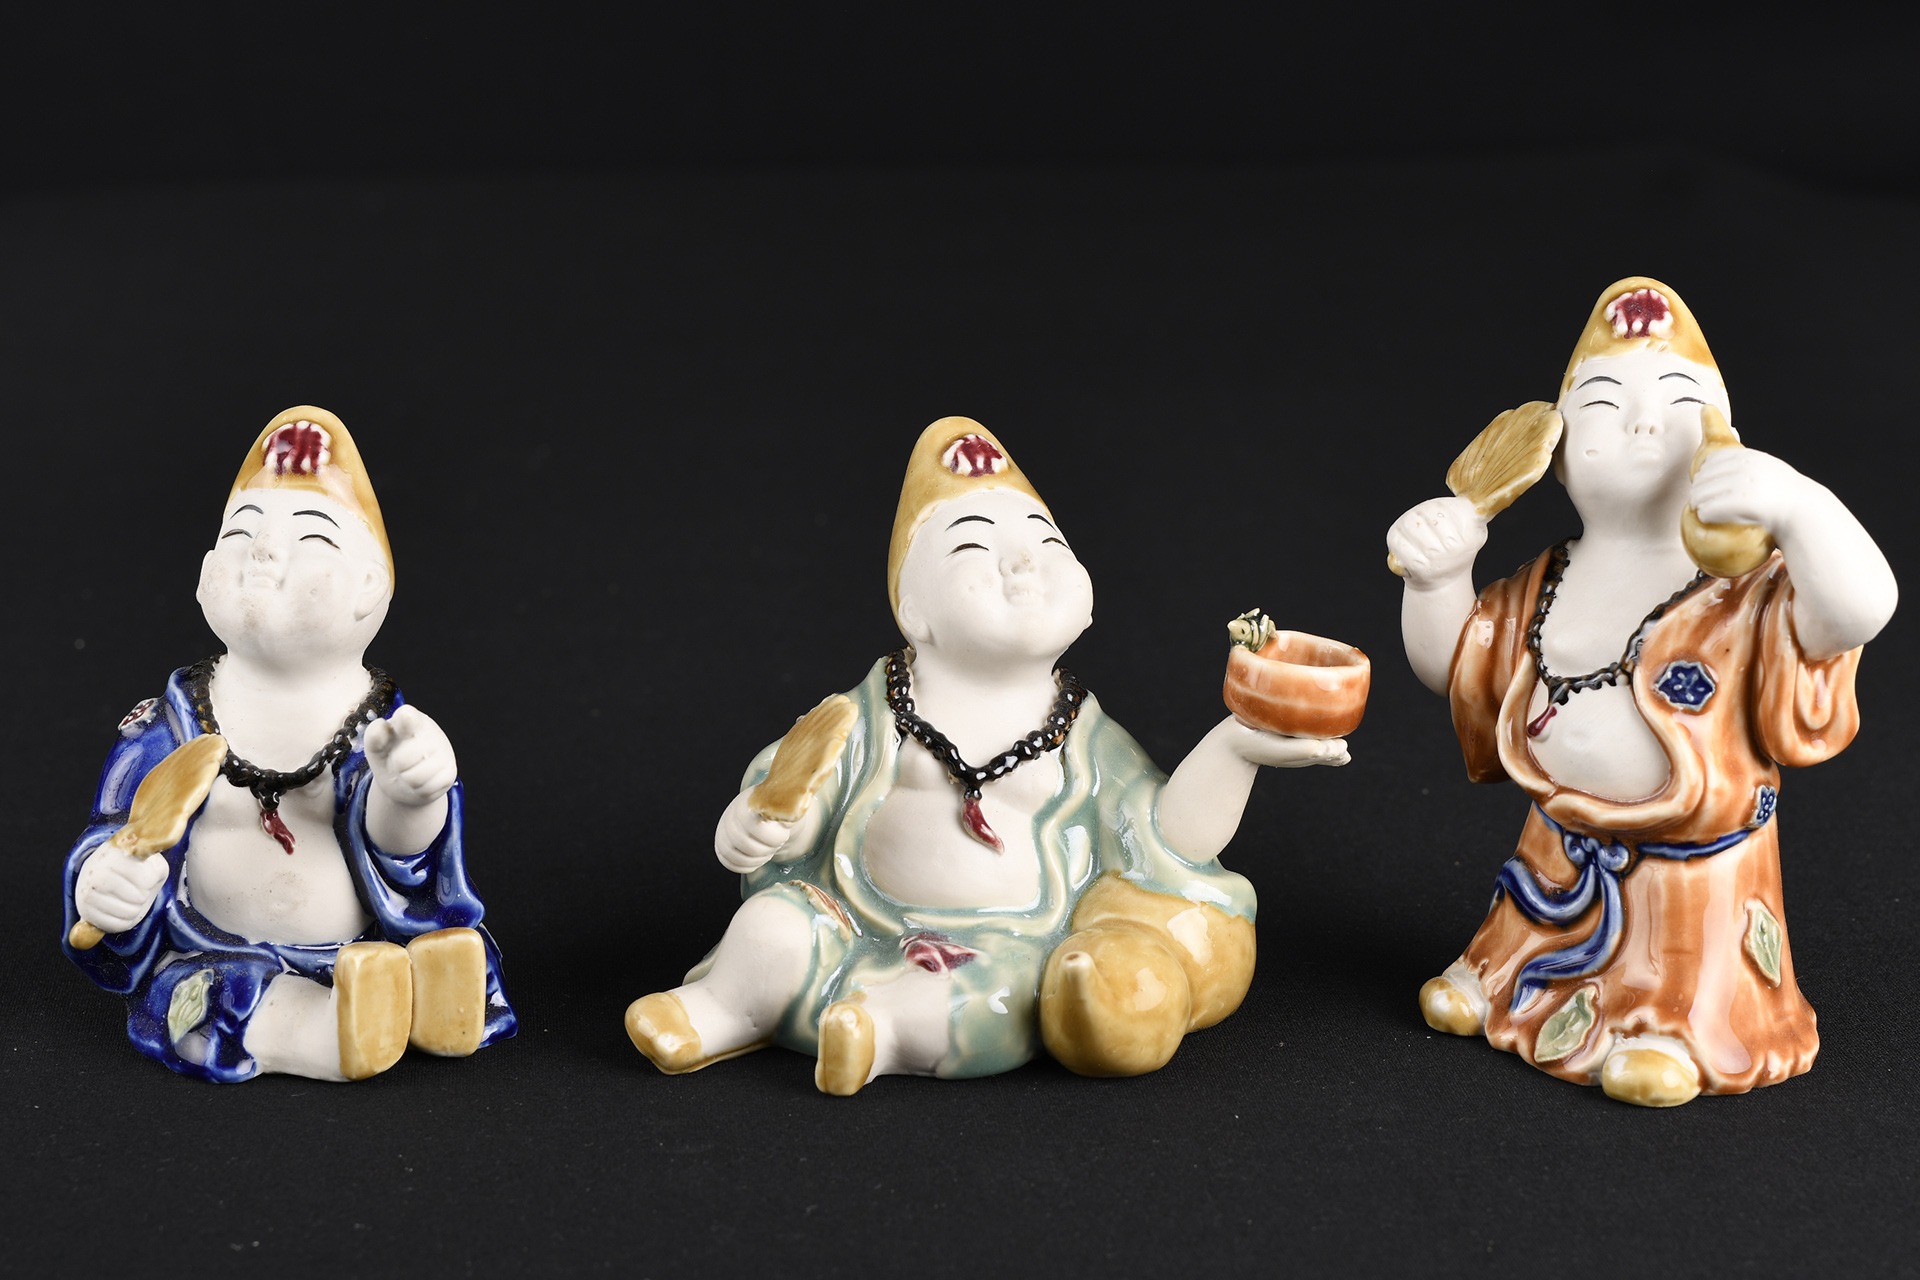 Set of 3 Porcelain Chinese Figures.